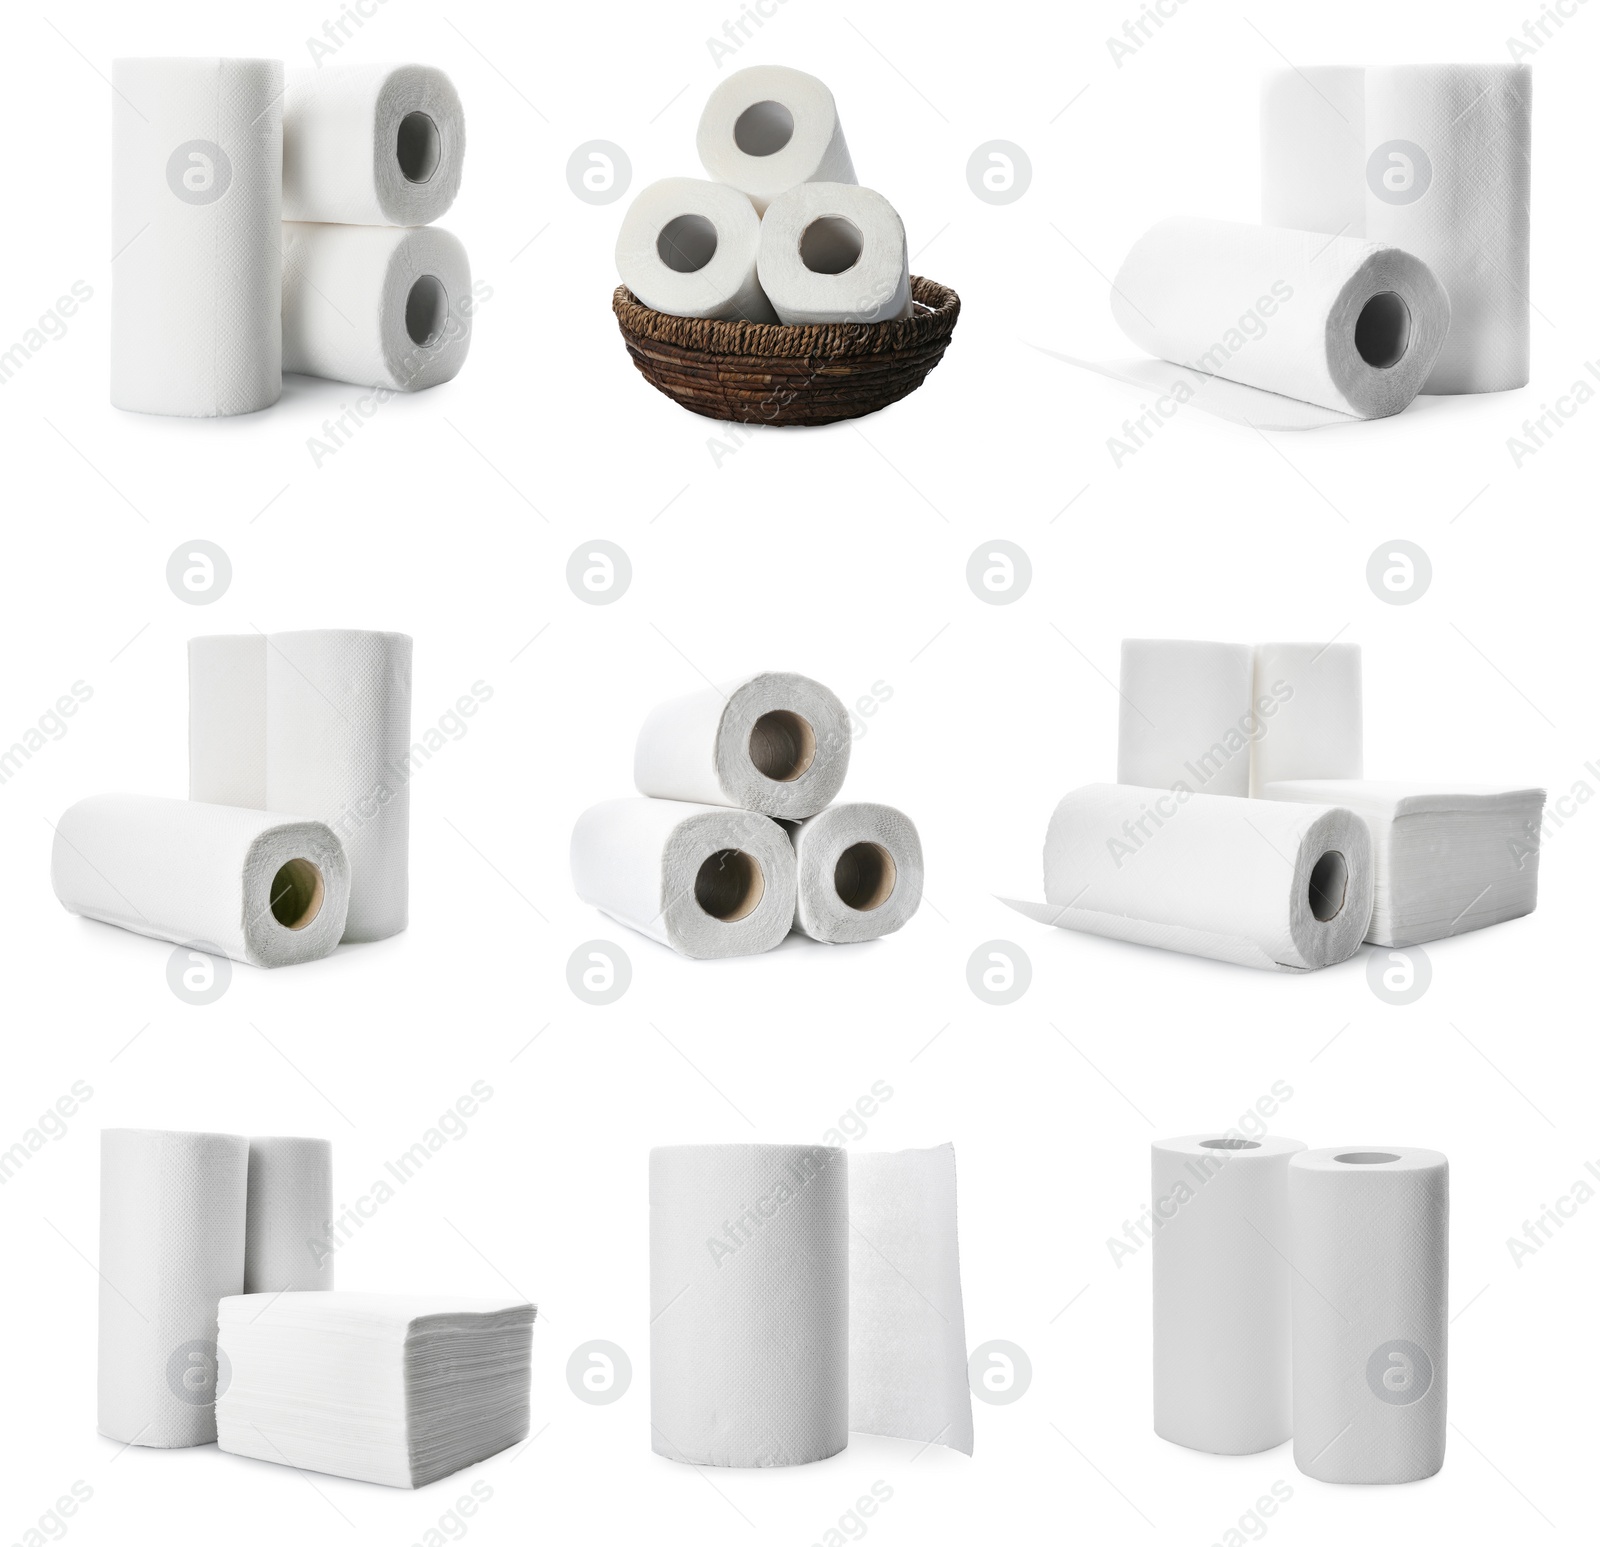 Image of Set with rolls of paper tissues isolated on white